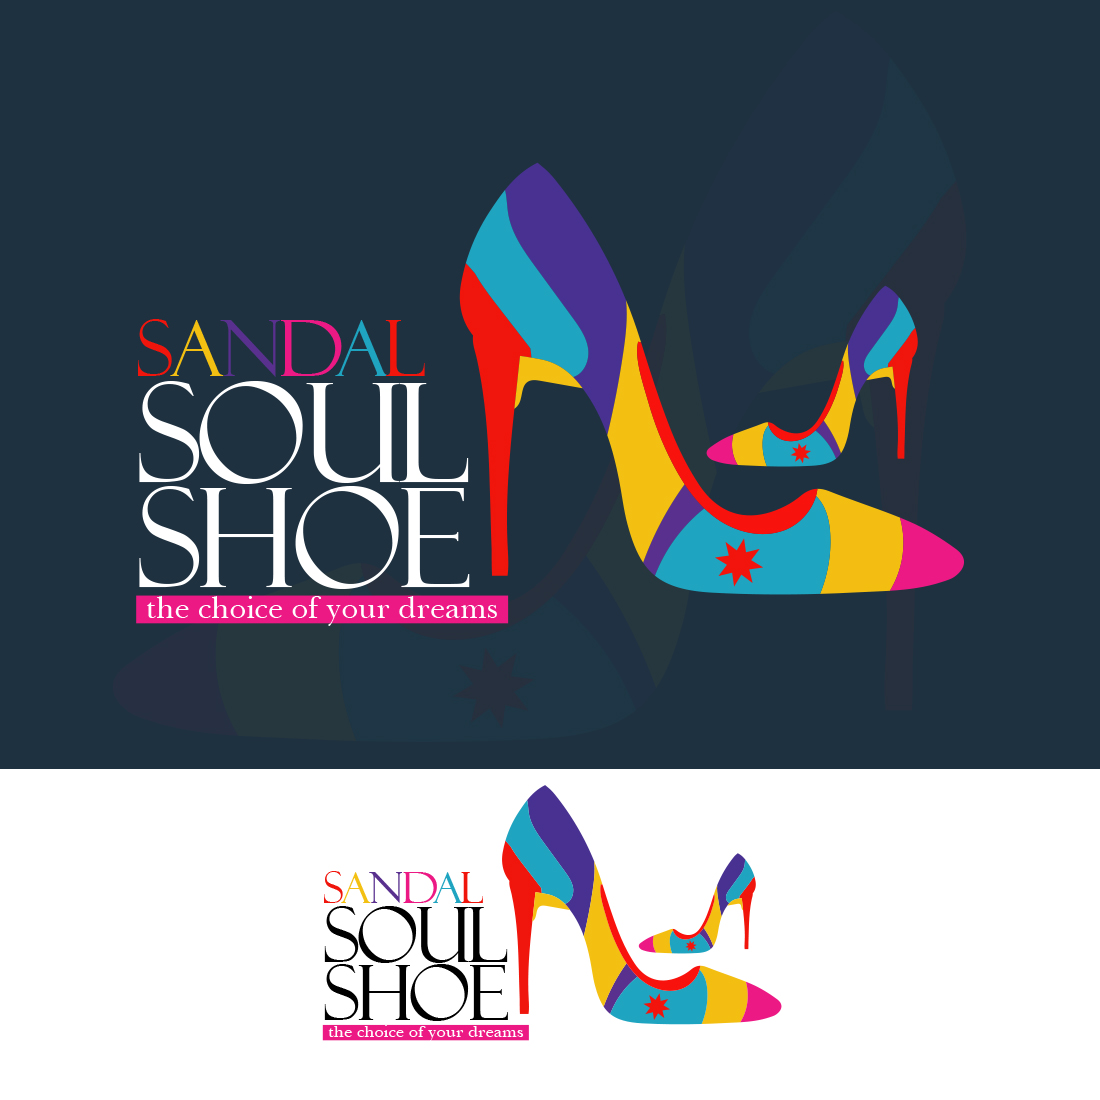 Business logo (Sandal Soul Shoe) with all formats - Only$10 preview image.